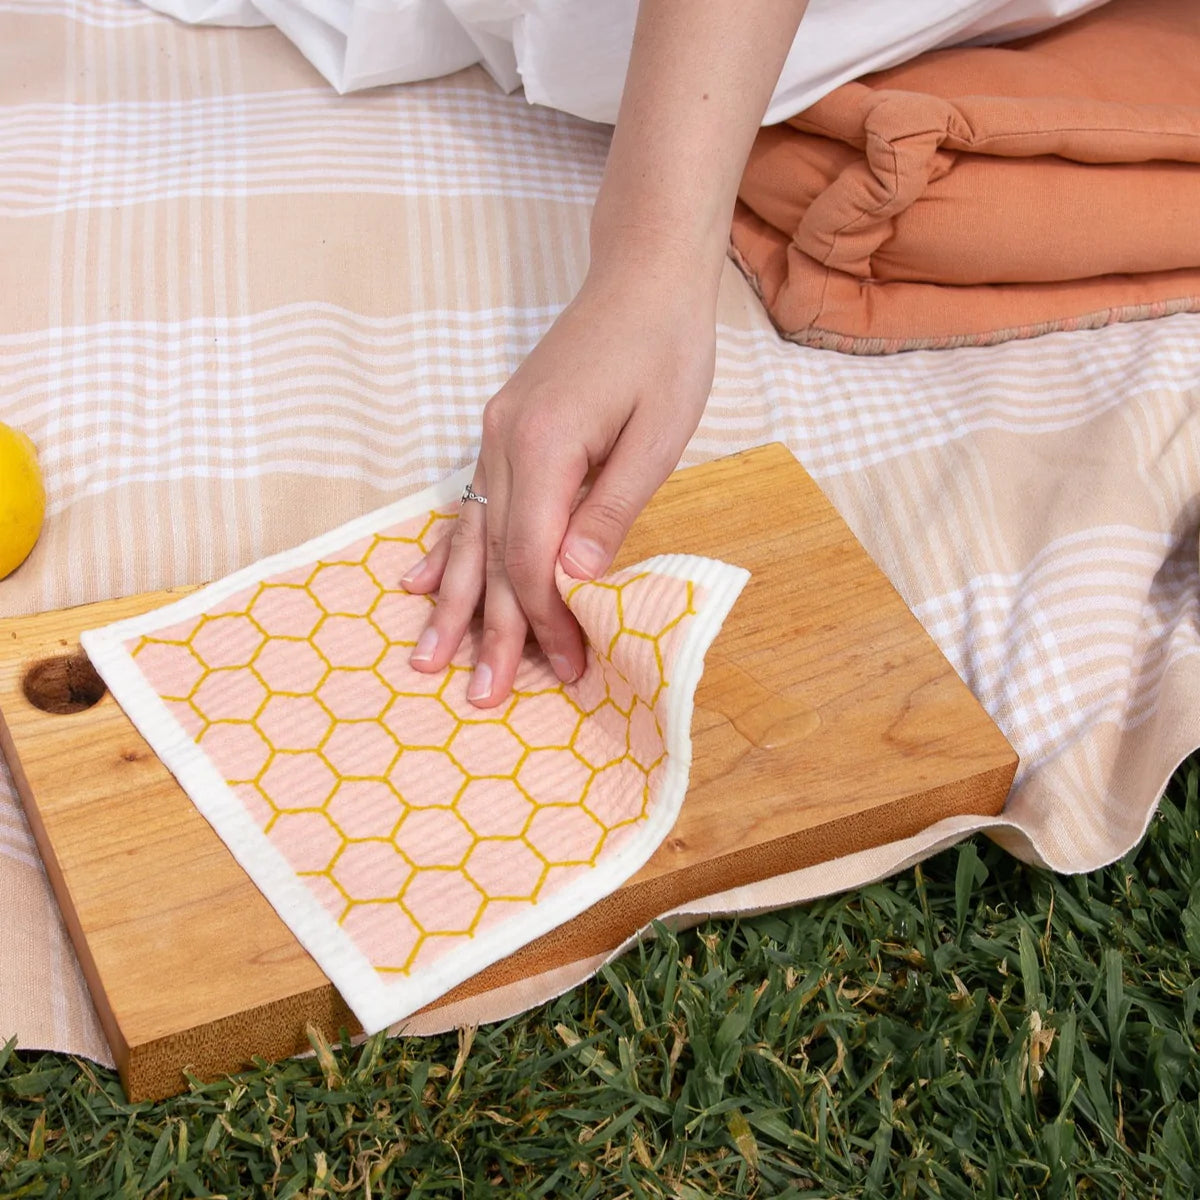 A woman's hand is wiping a wooden chopping board using the pink honeycomb Goldilocks dishcloth in a picnic setting.